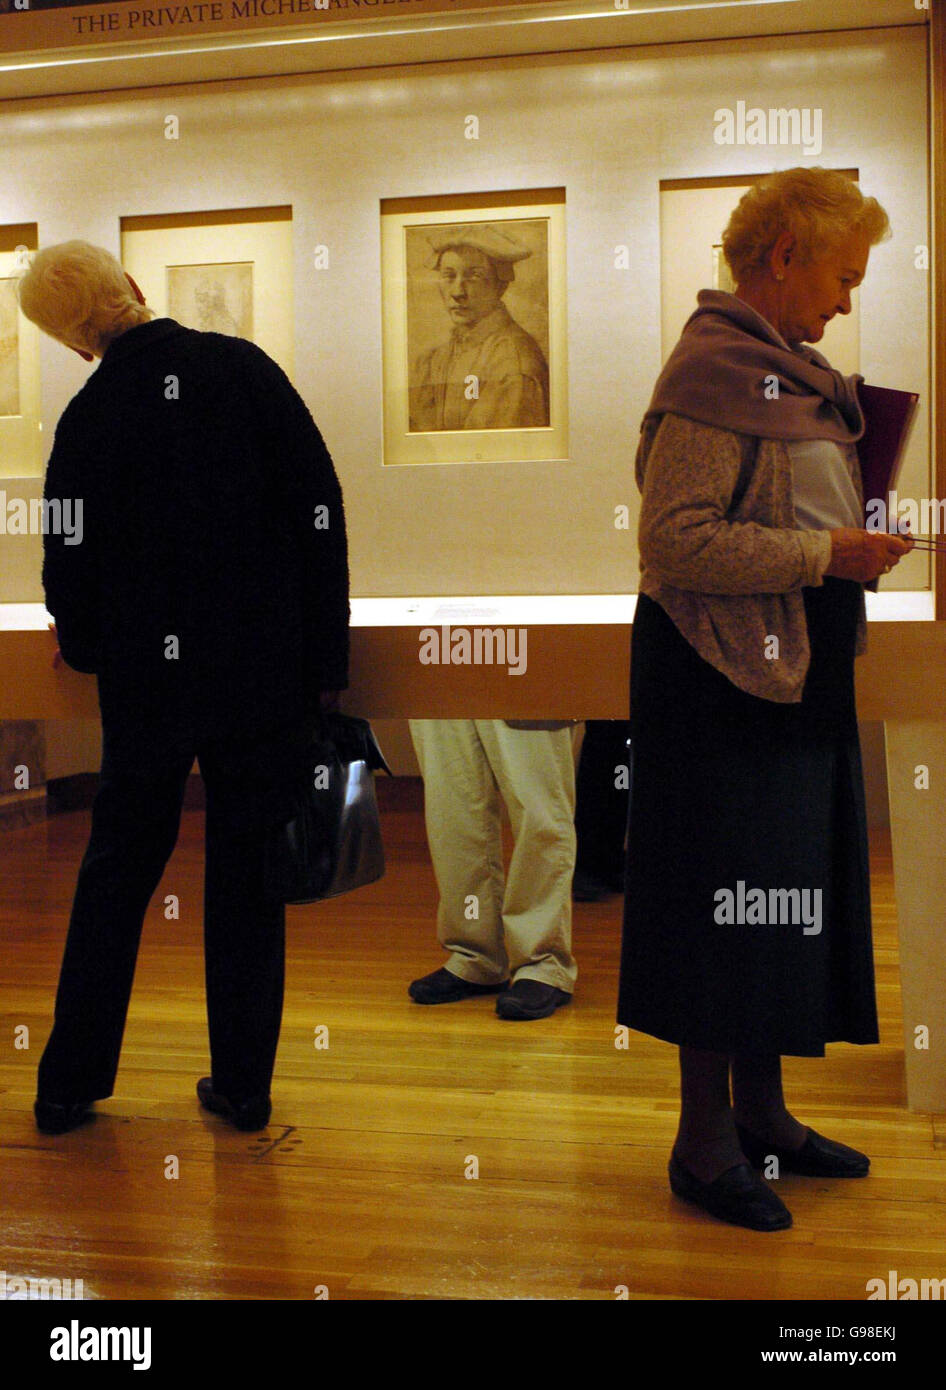 Visitors to the British Museum view a portrait of the Renaissance artist Michelangelo, at an exhibition called 'Closer To The Master'. The exhibition is being previewed at the museum, Monday March 20, 2006, prior to its opening on Thursday. It's museum's first showing of the artist's works for thirty years. PRESS ASSOCIATION Photo. Photo credit should read: Ian Nicholson/PA Stock Photo